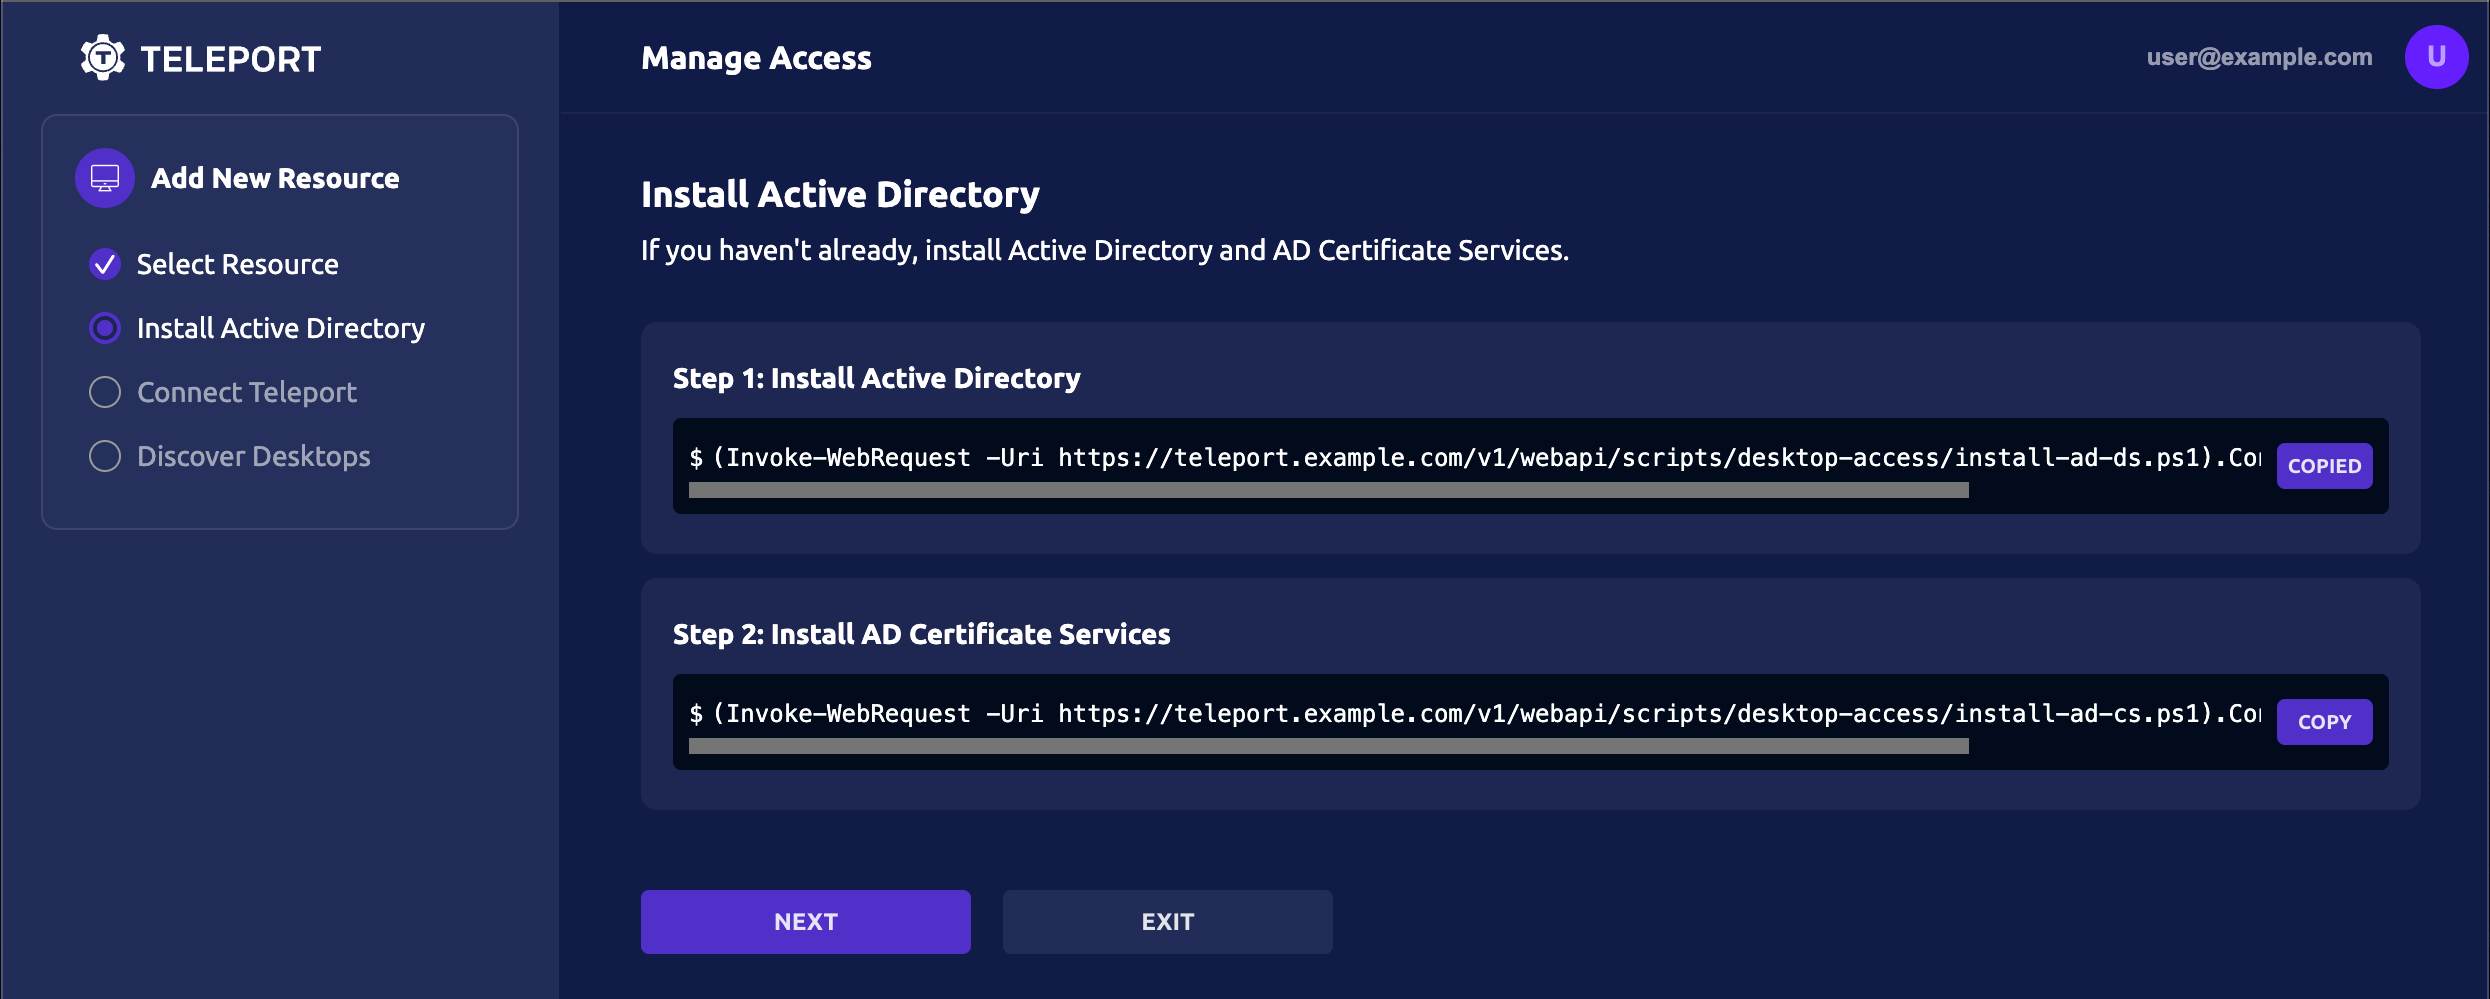 Install Active Directory